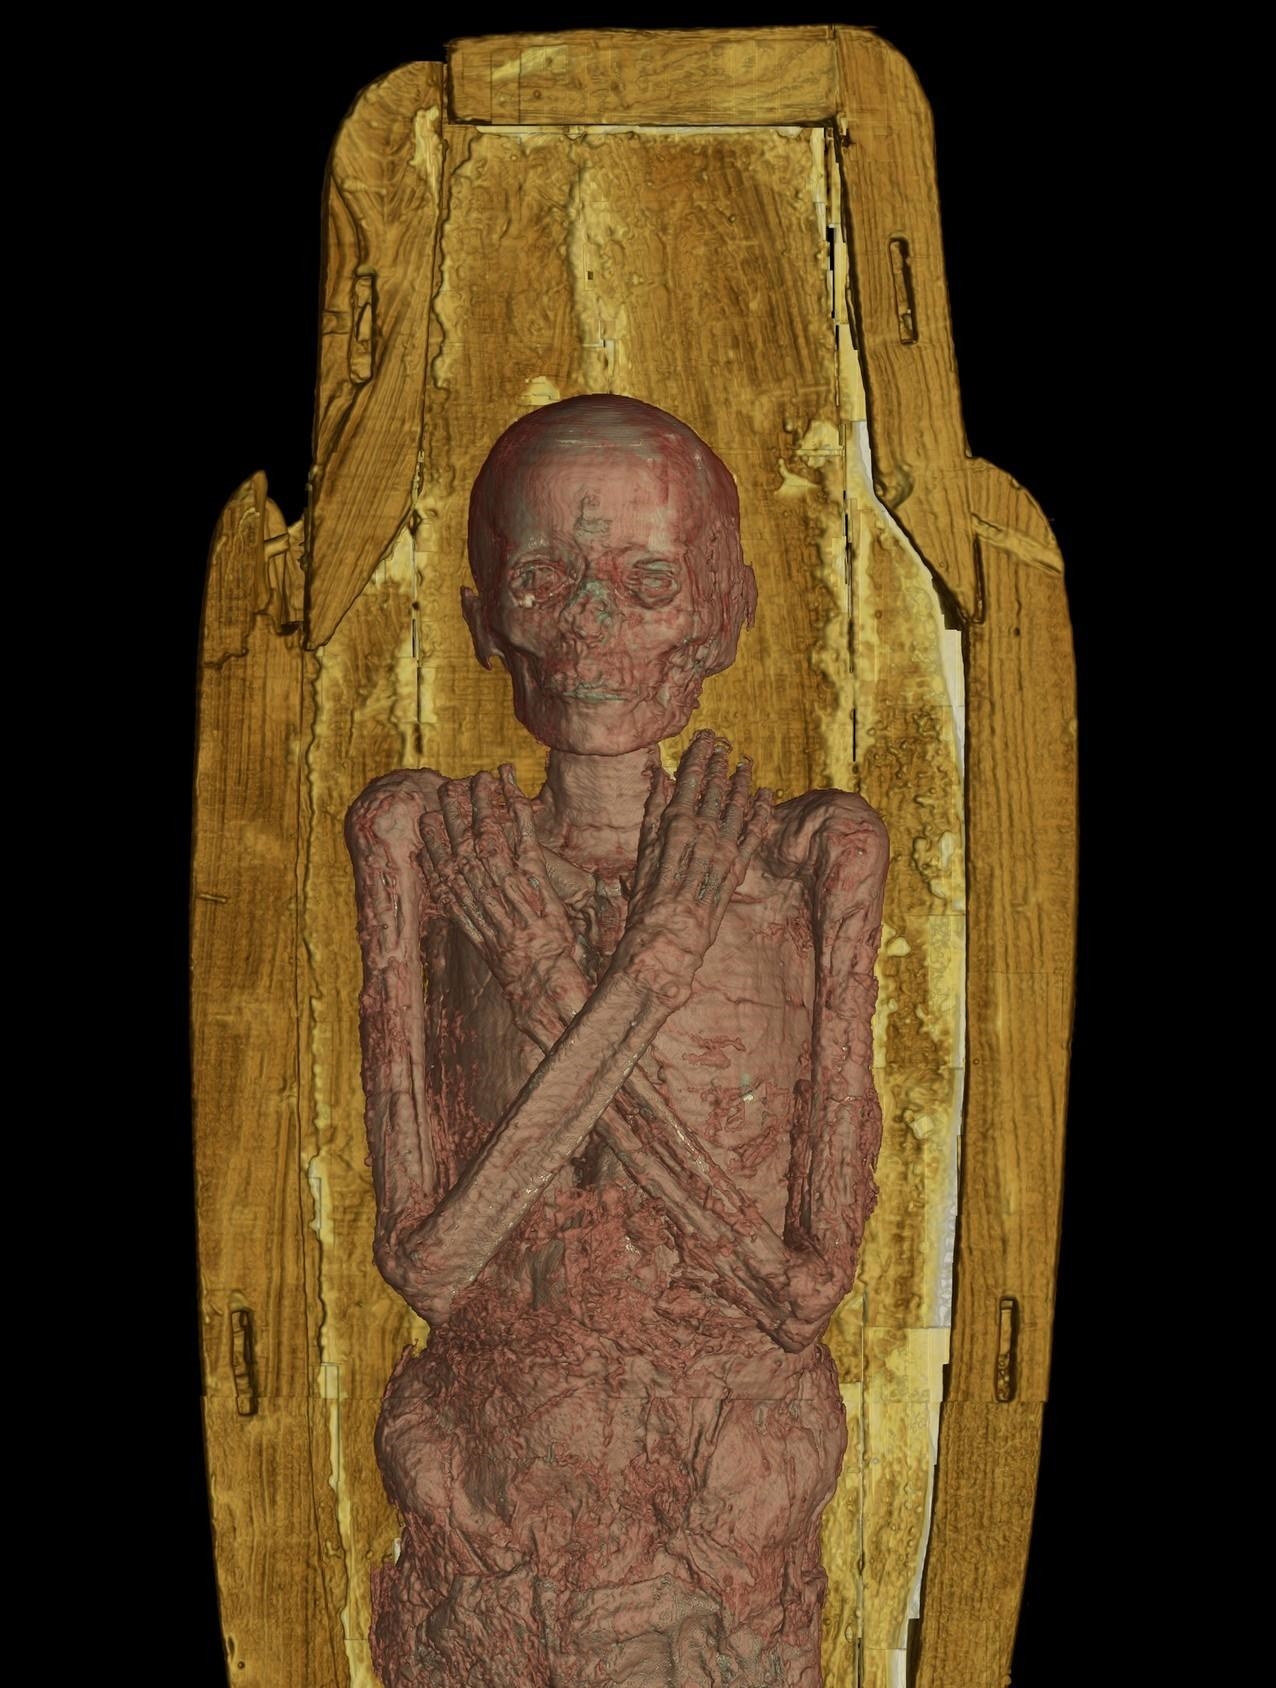 Researchers used CT scans to virtually unwrap a pristine mummy | DeviceDaily.com